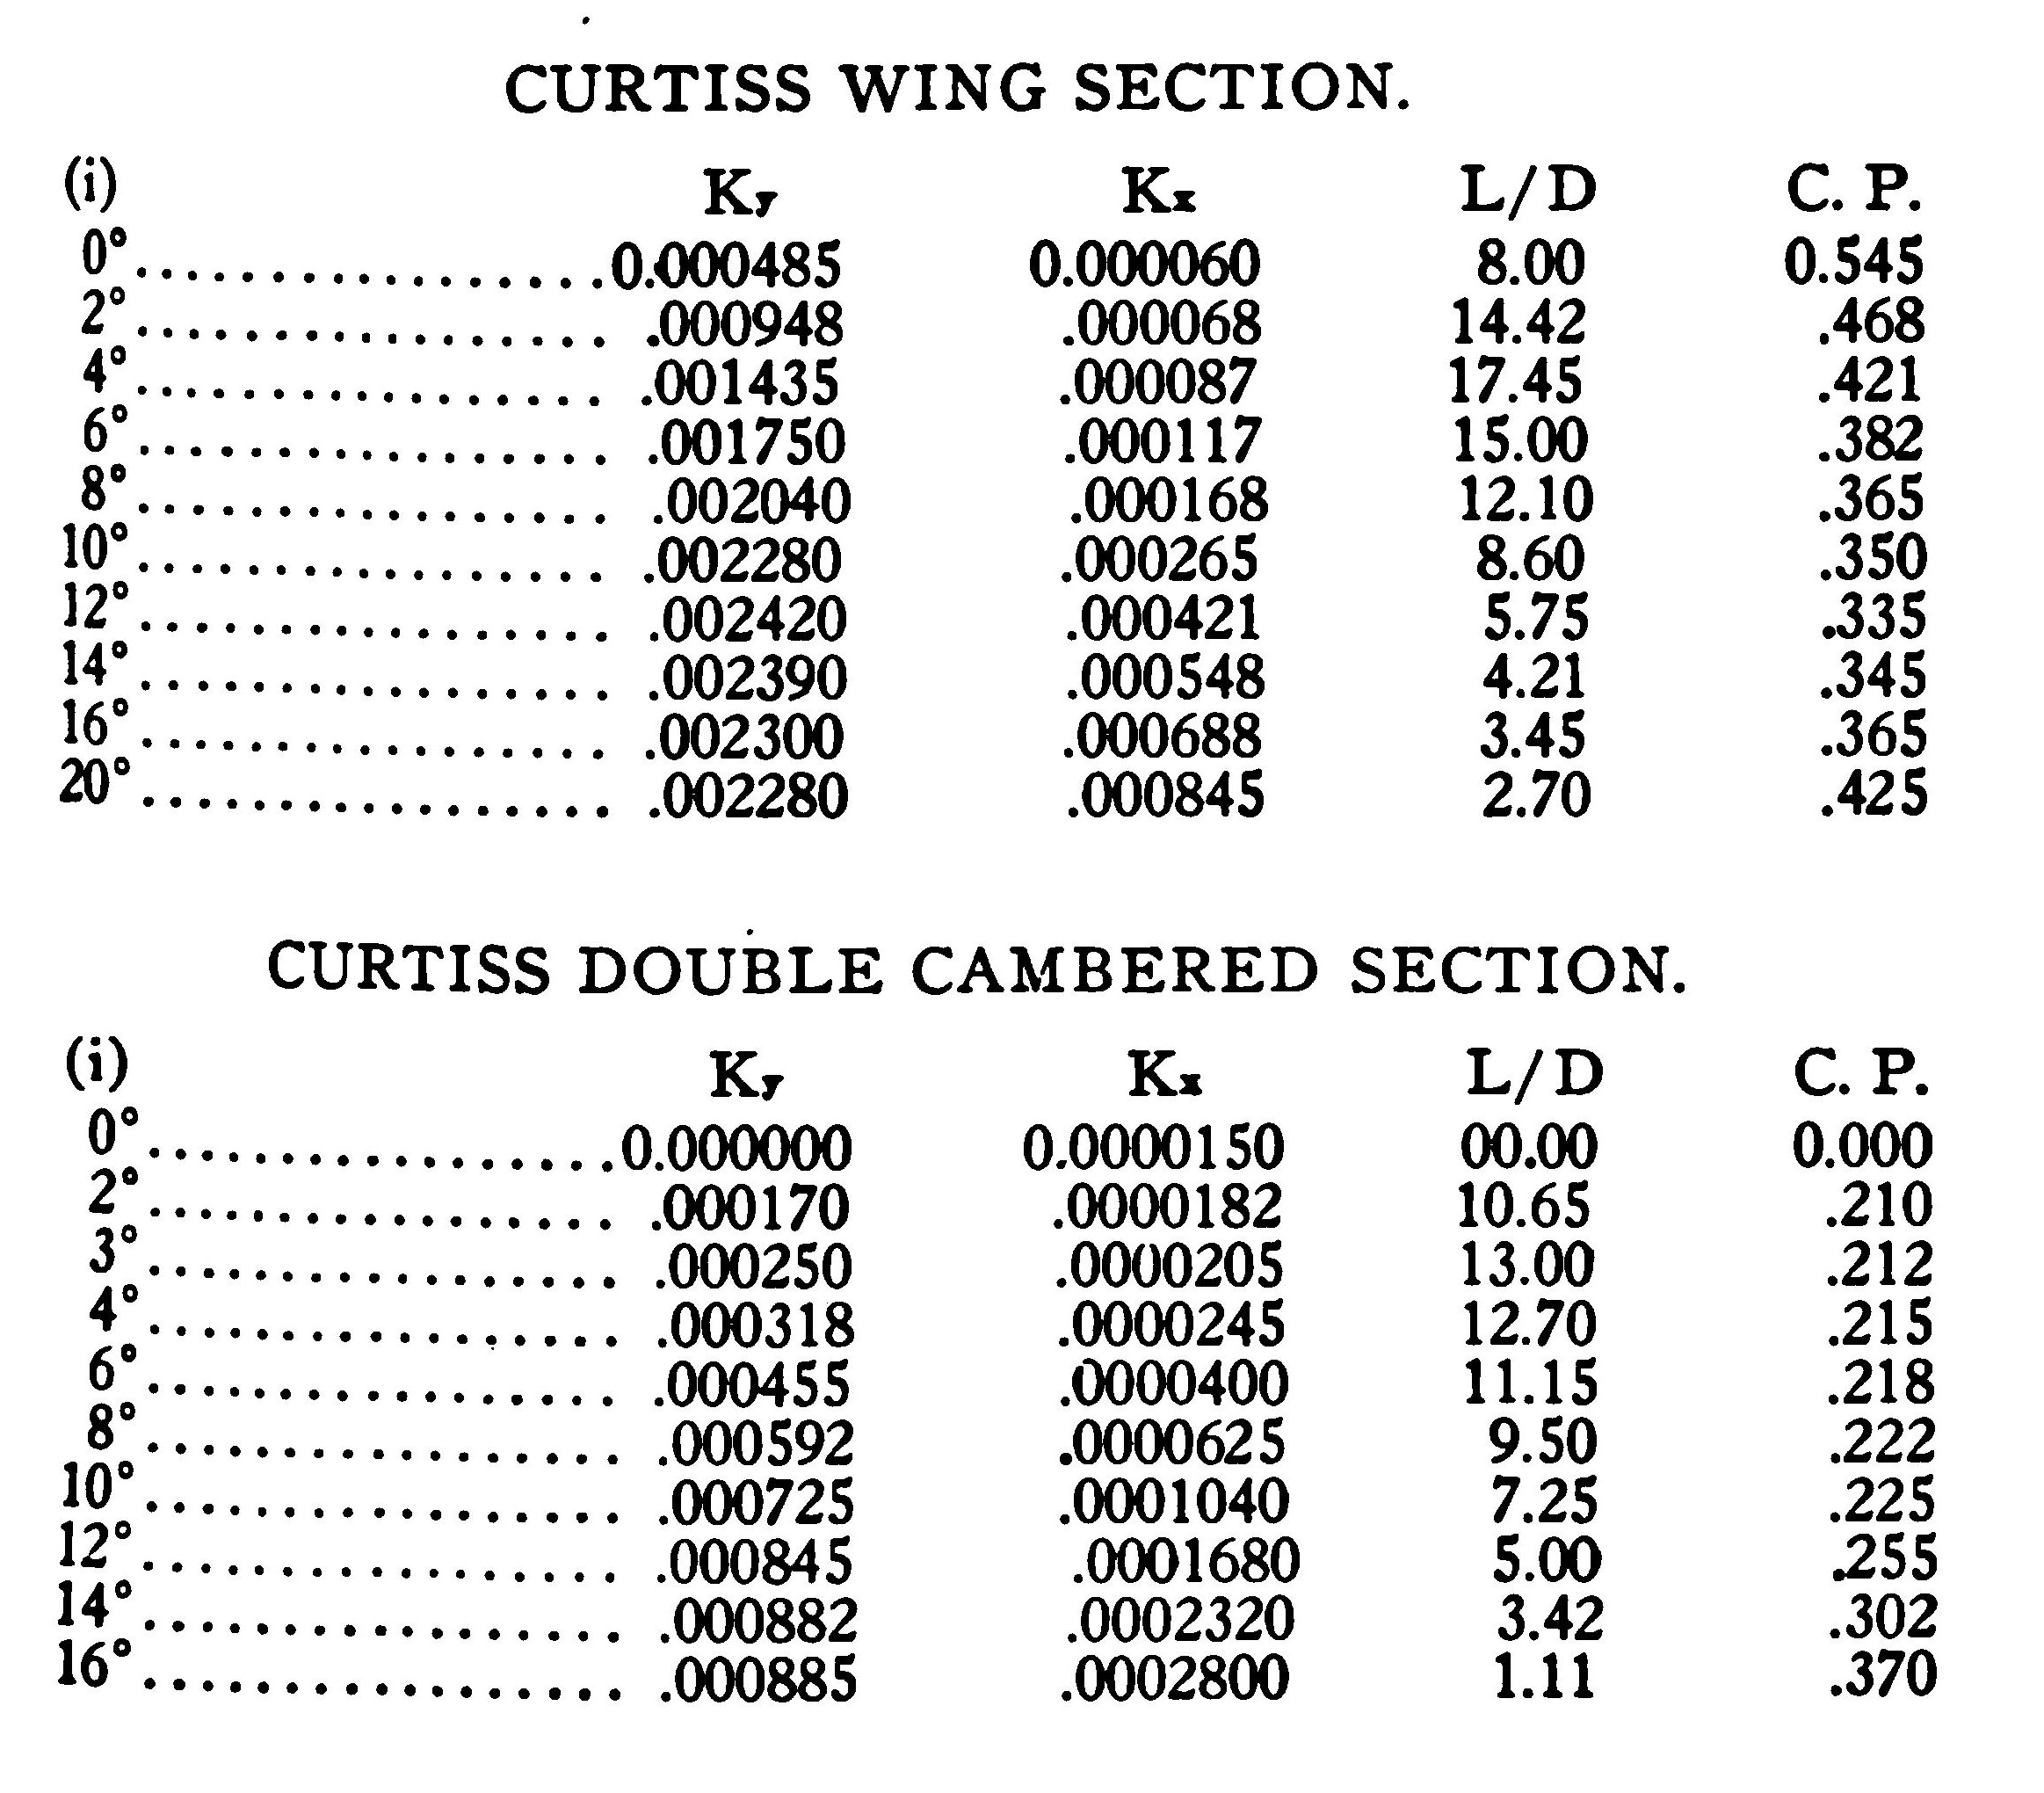 Tables Curtiss Wing Section and Curtiss Double Cambered Section